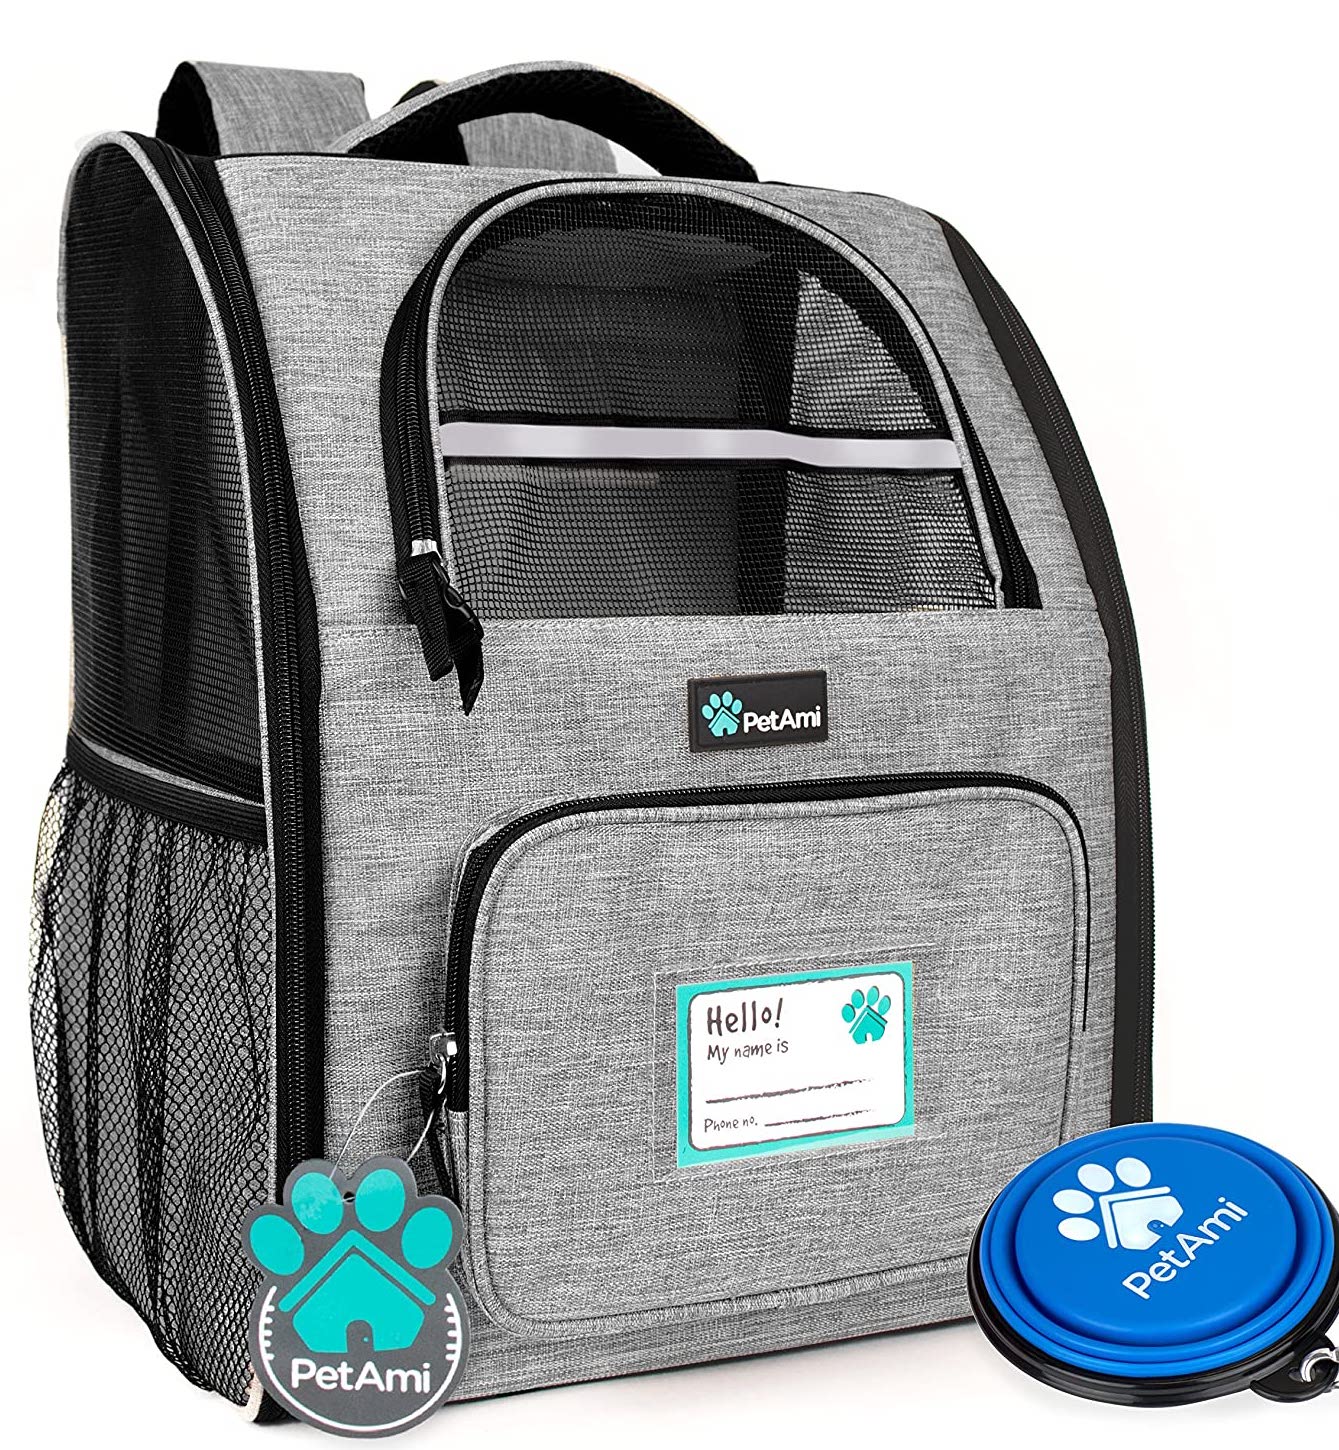 Tucker Murphy Pet™ Pet Carrier Backpack For Large/Small Cats And